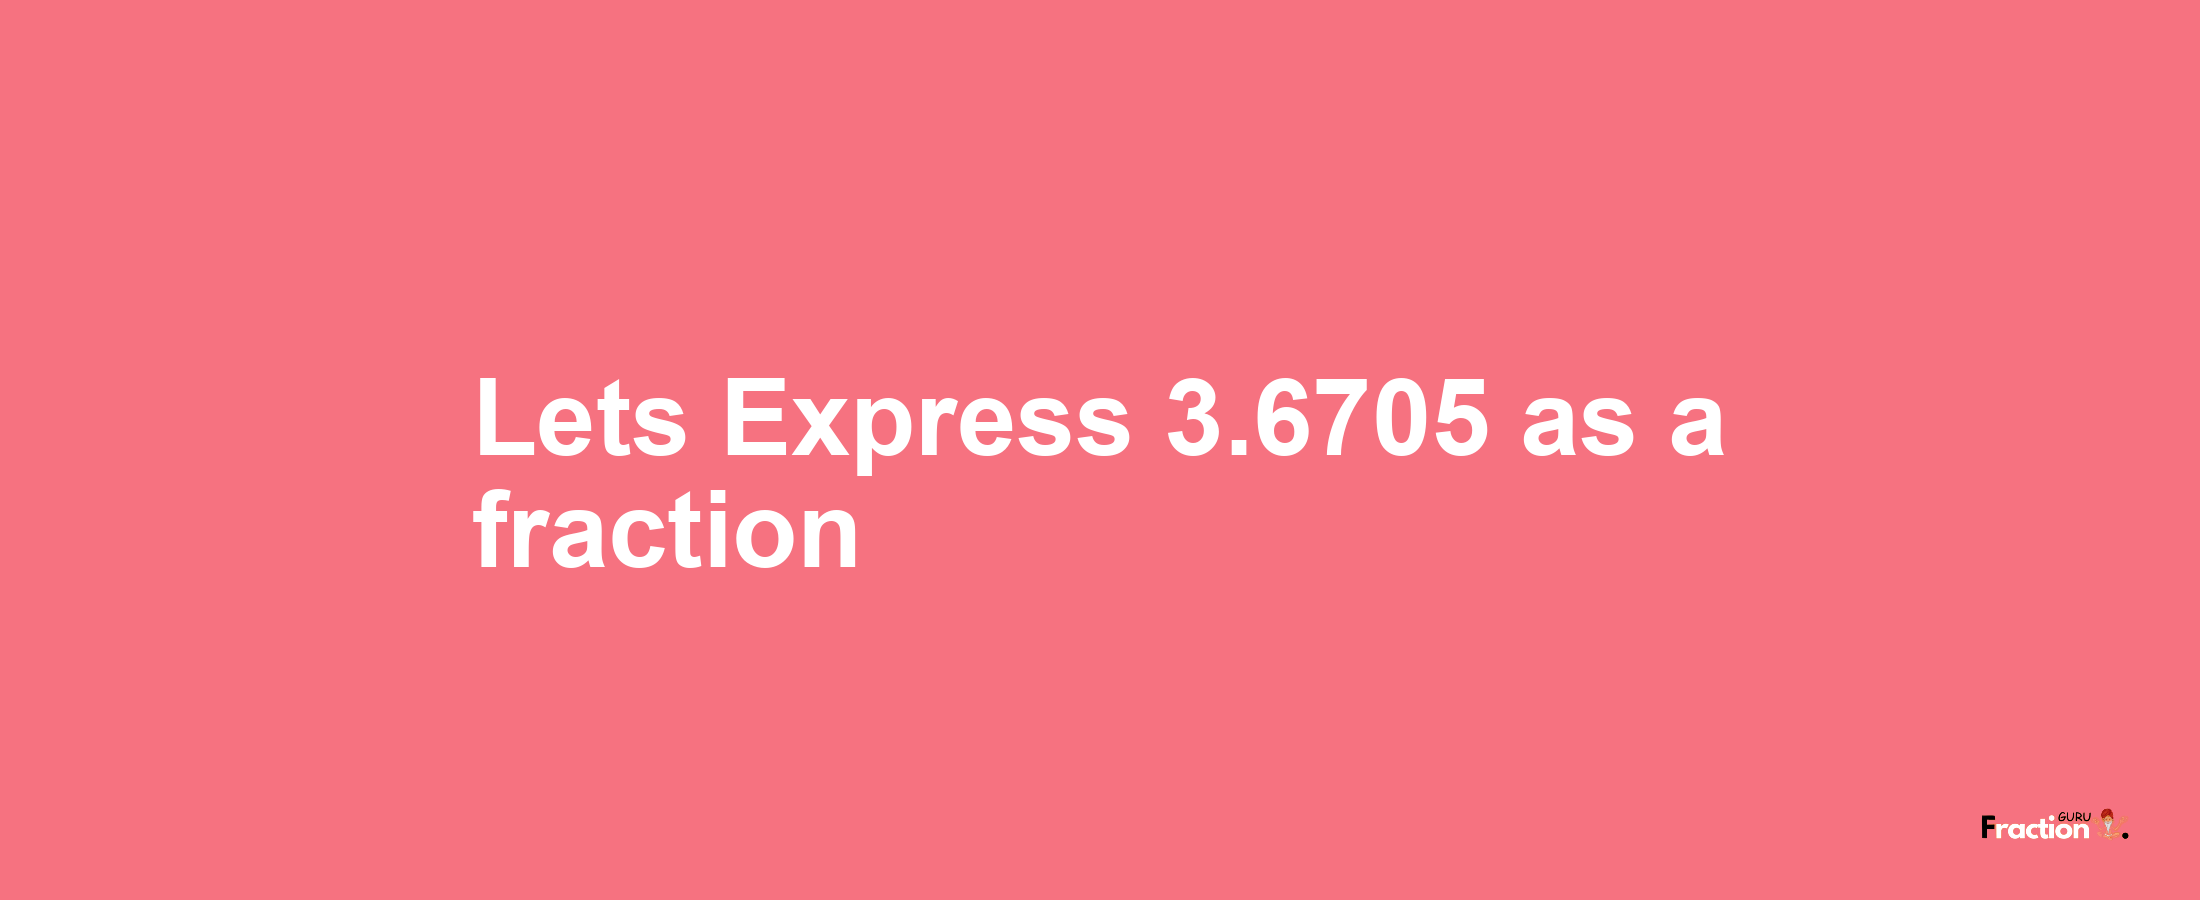 Lets Express 3.6705 as afraction